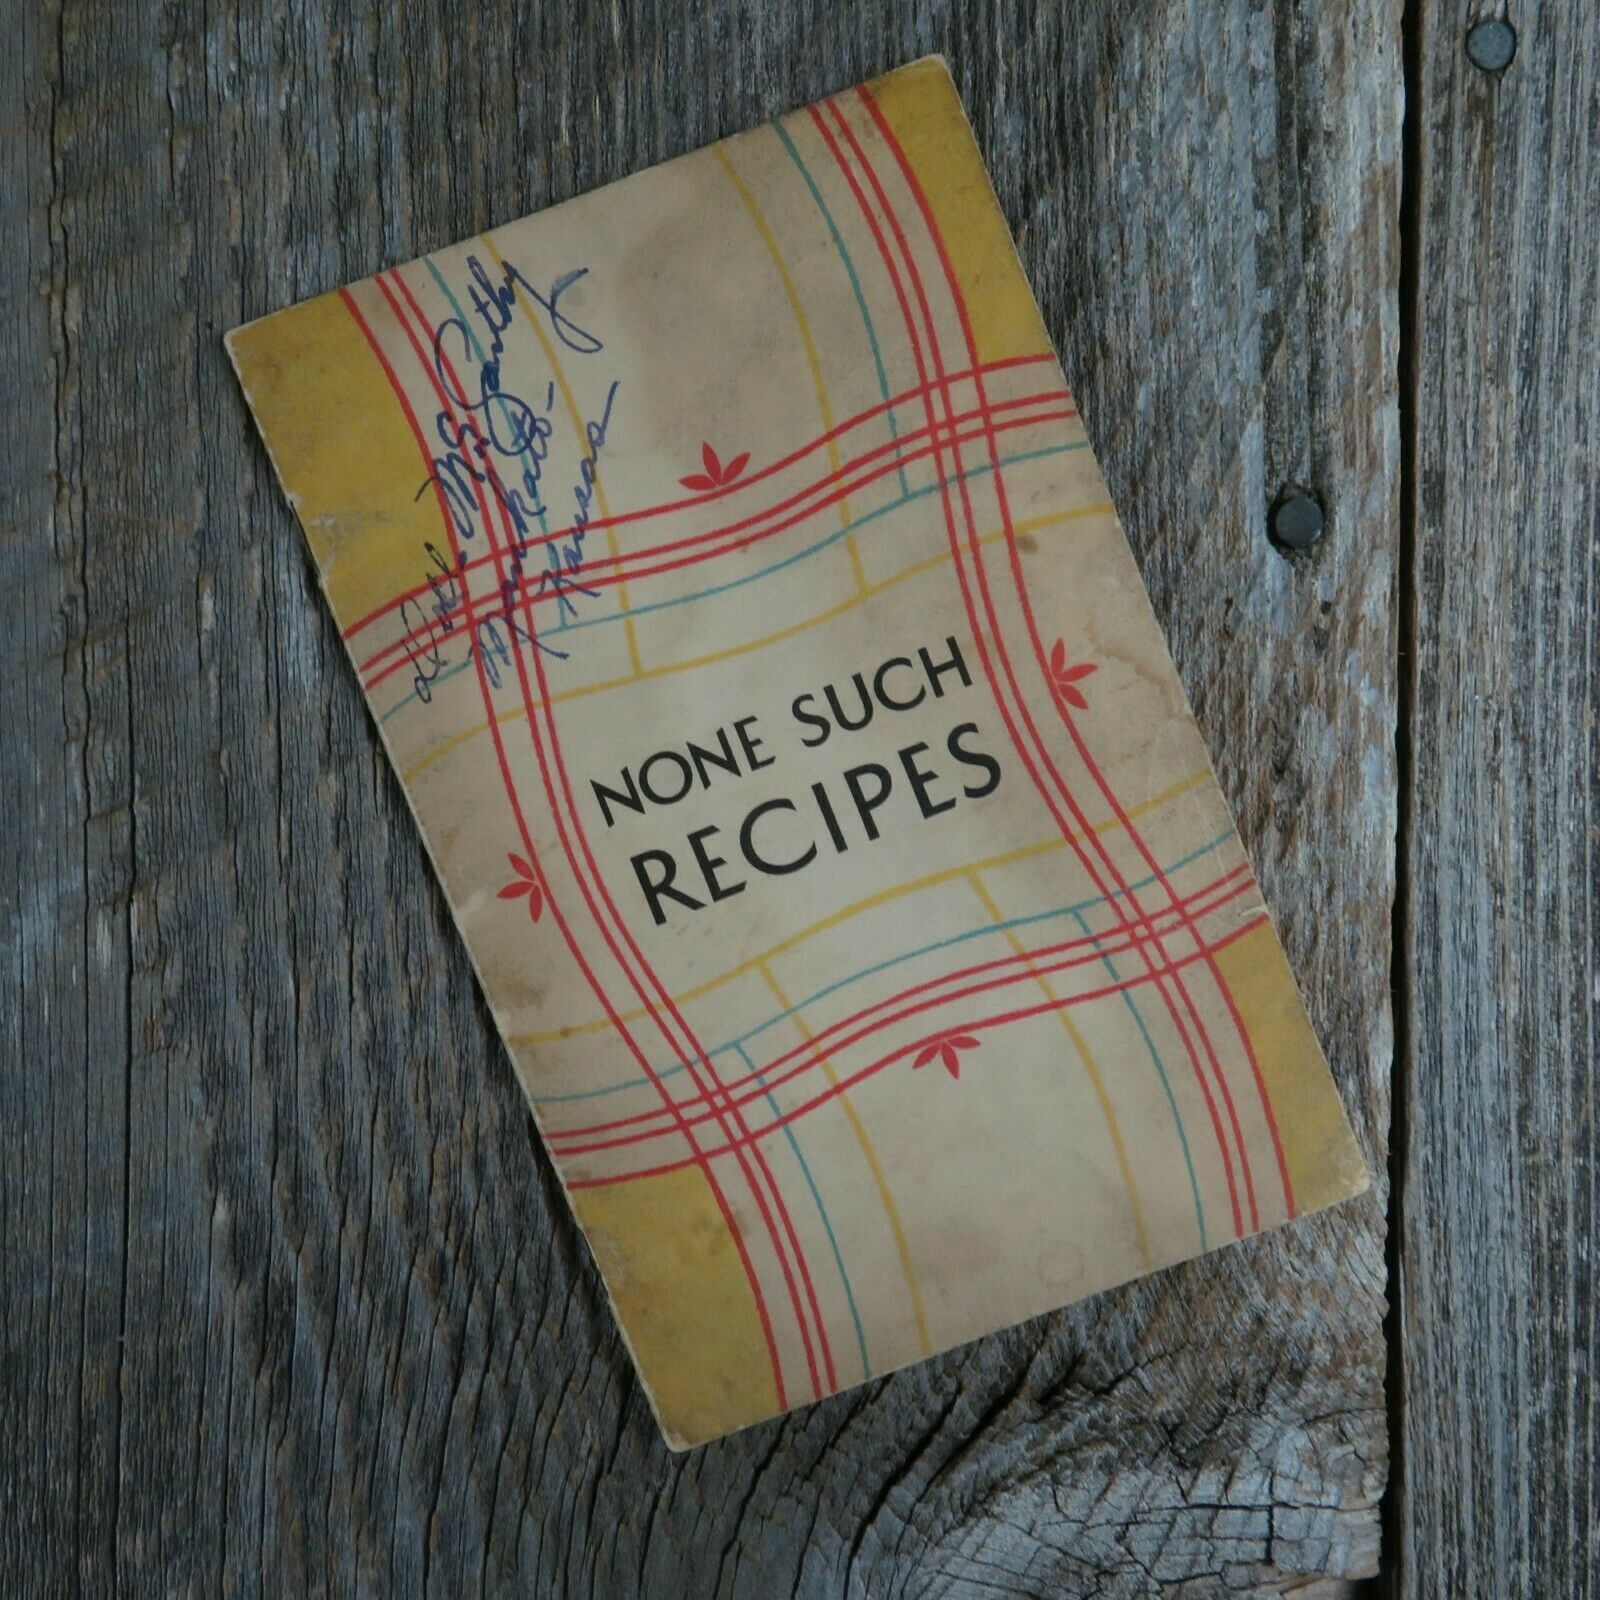 Vintage Cookbook None Such Recipes Mince Meat Pie Promo Booklet 1940s or 50s - At Grandma's Table